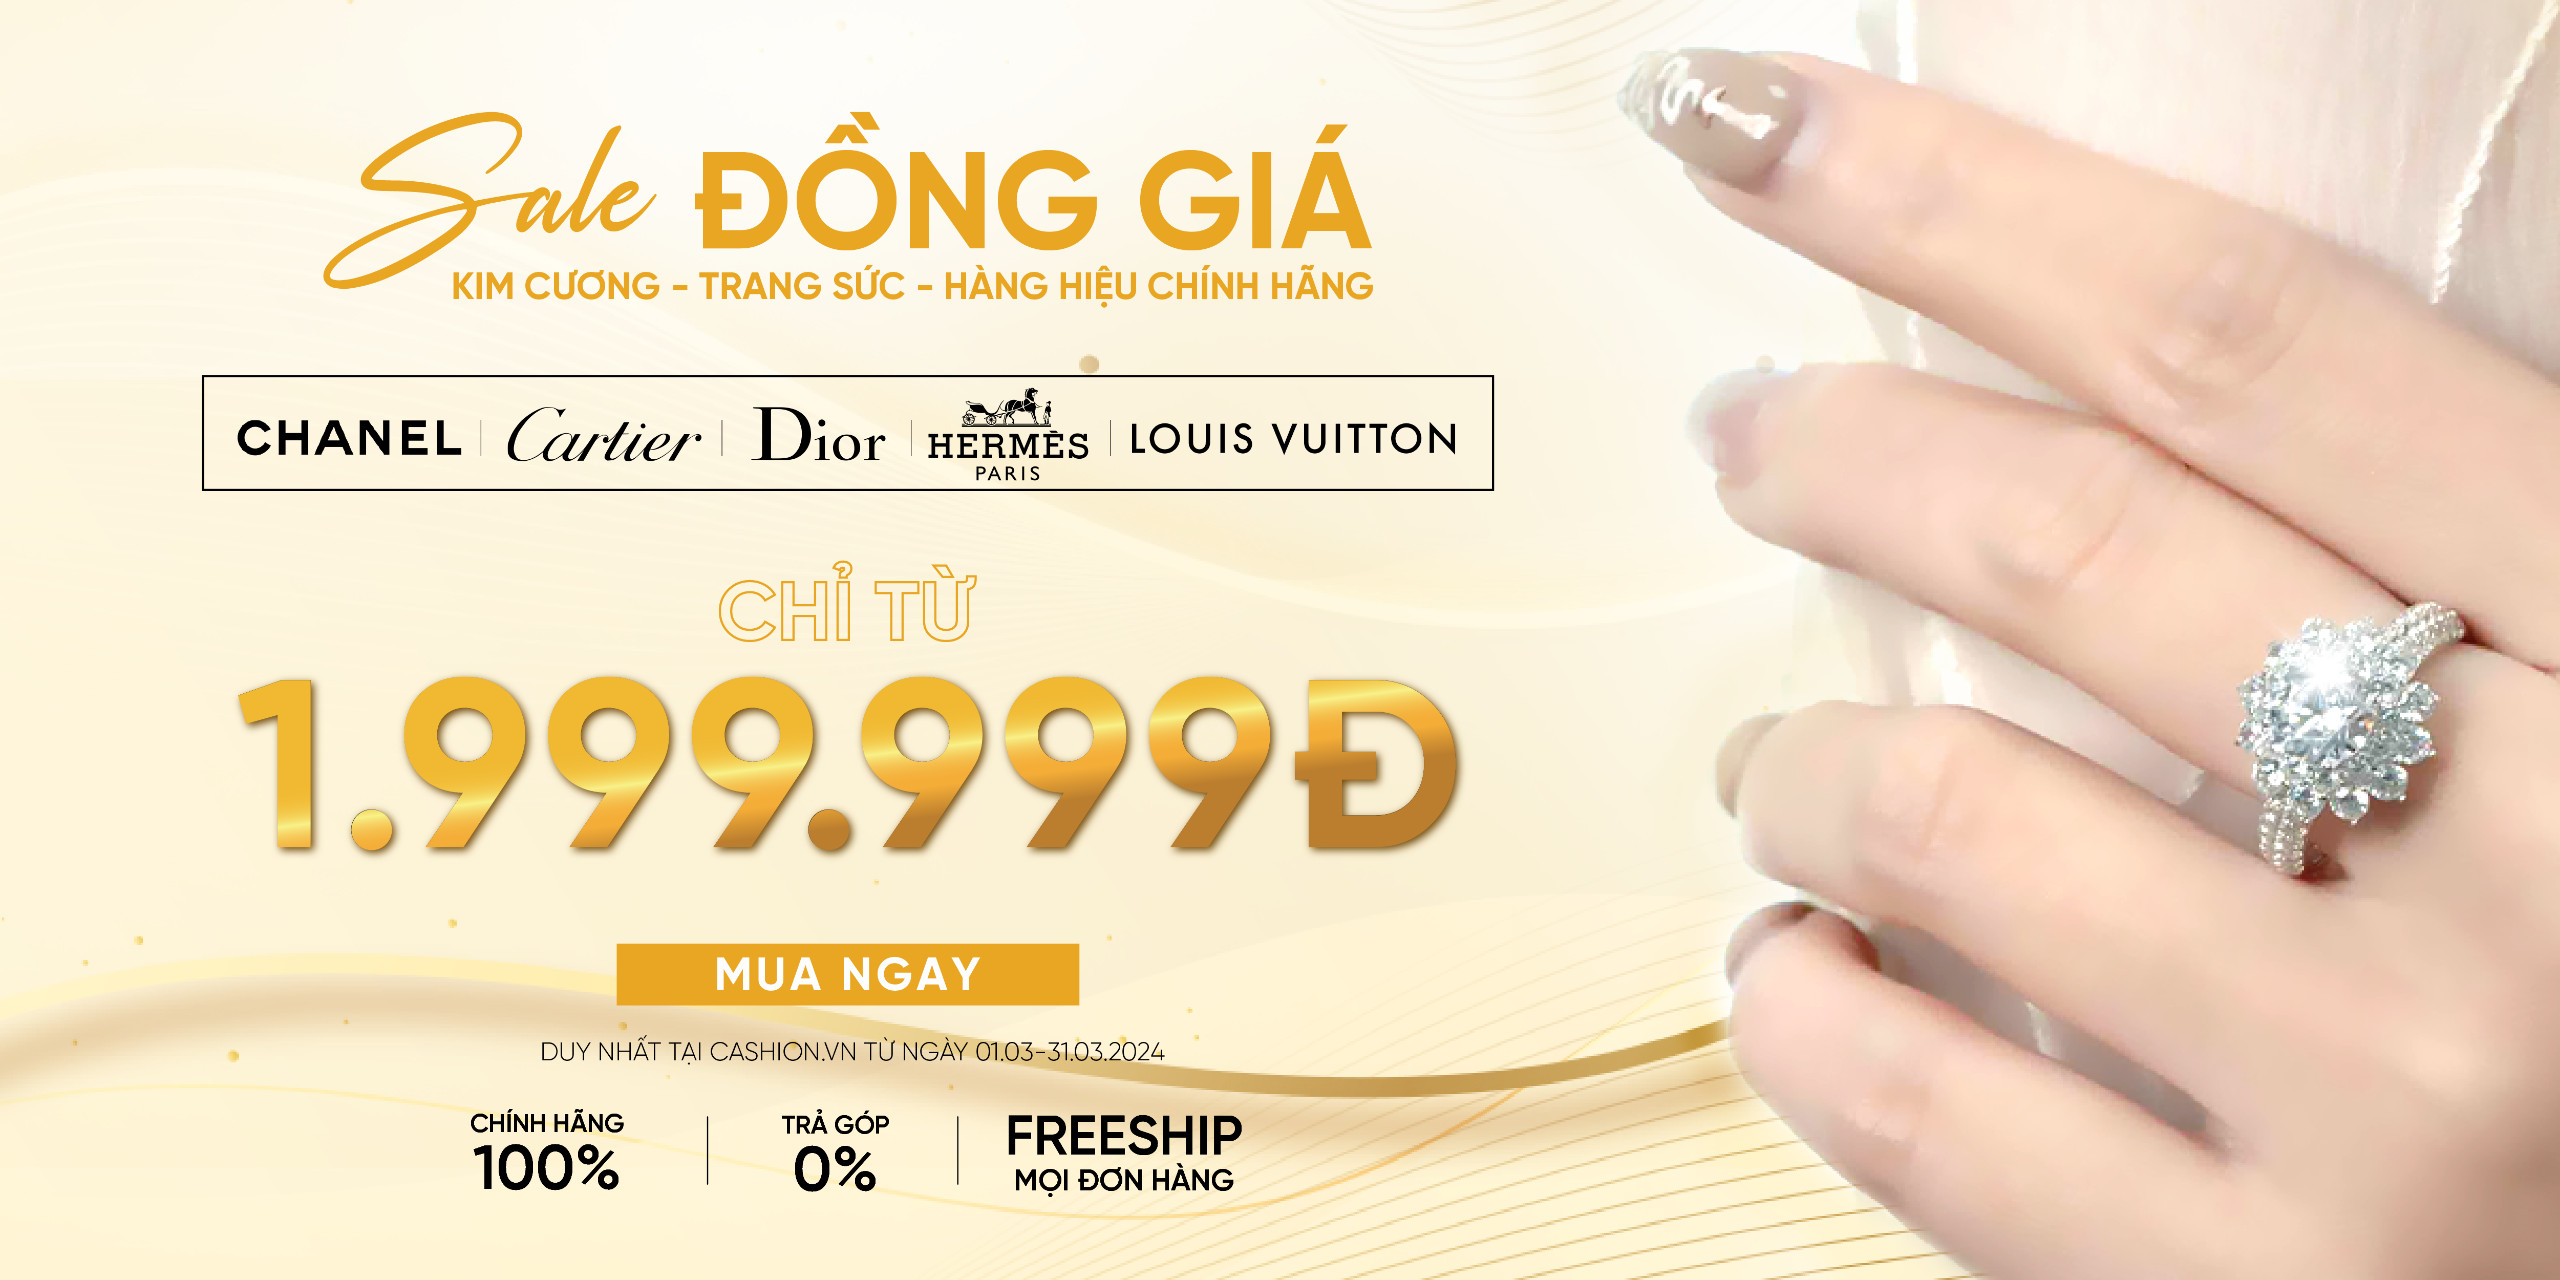 CT Sale dong gia